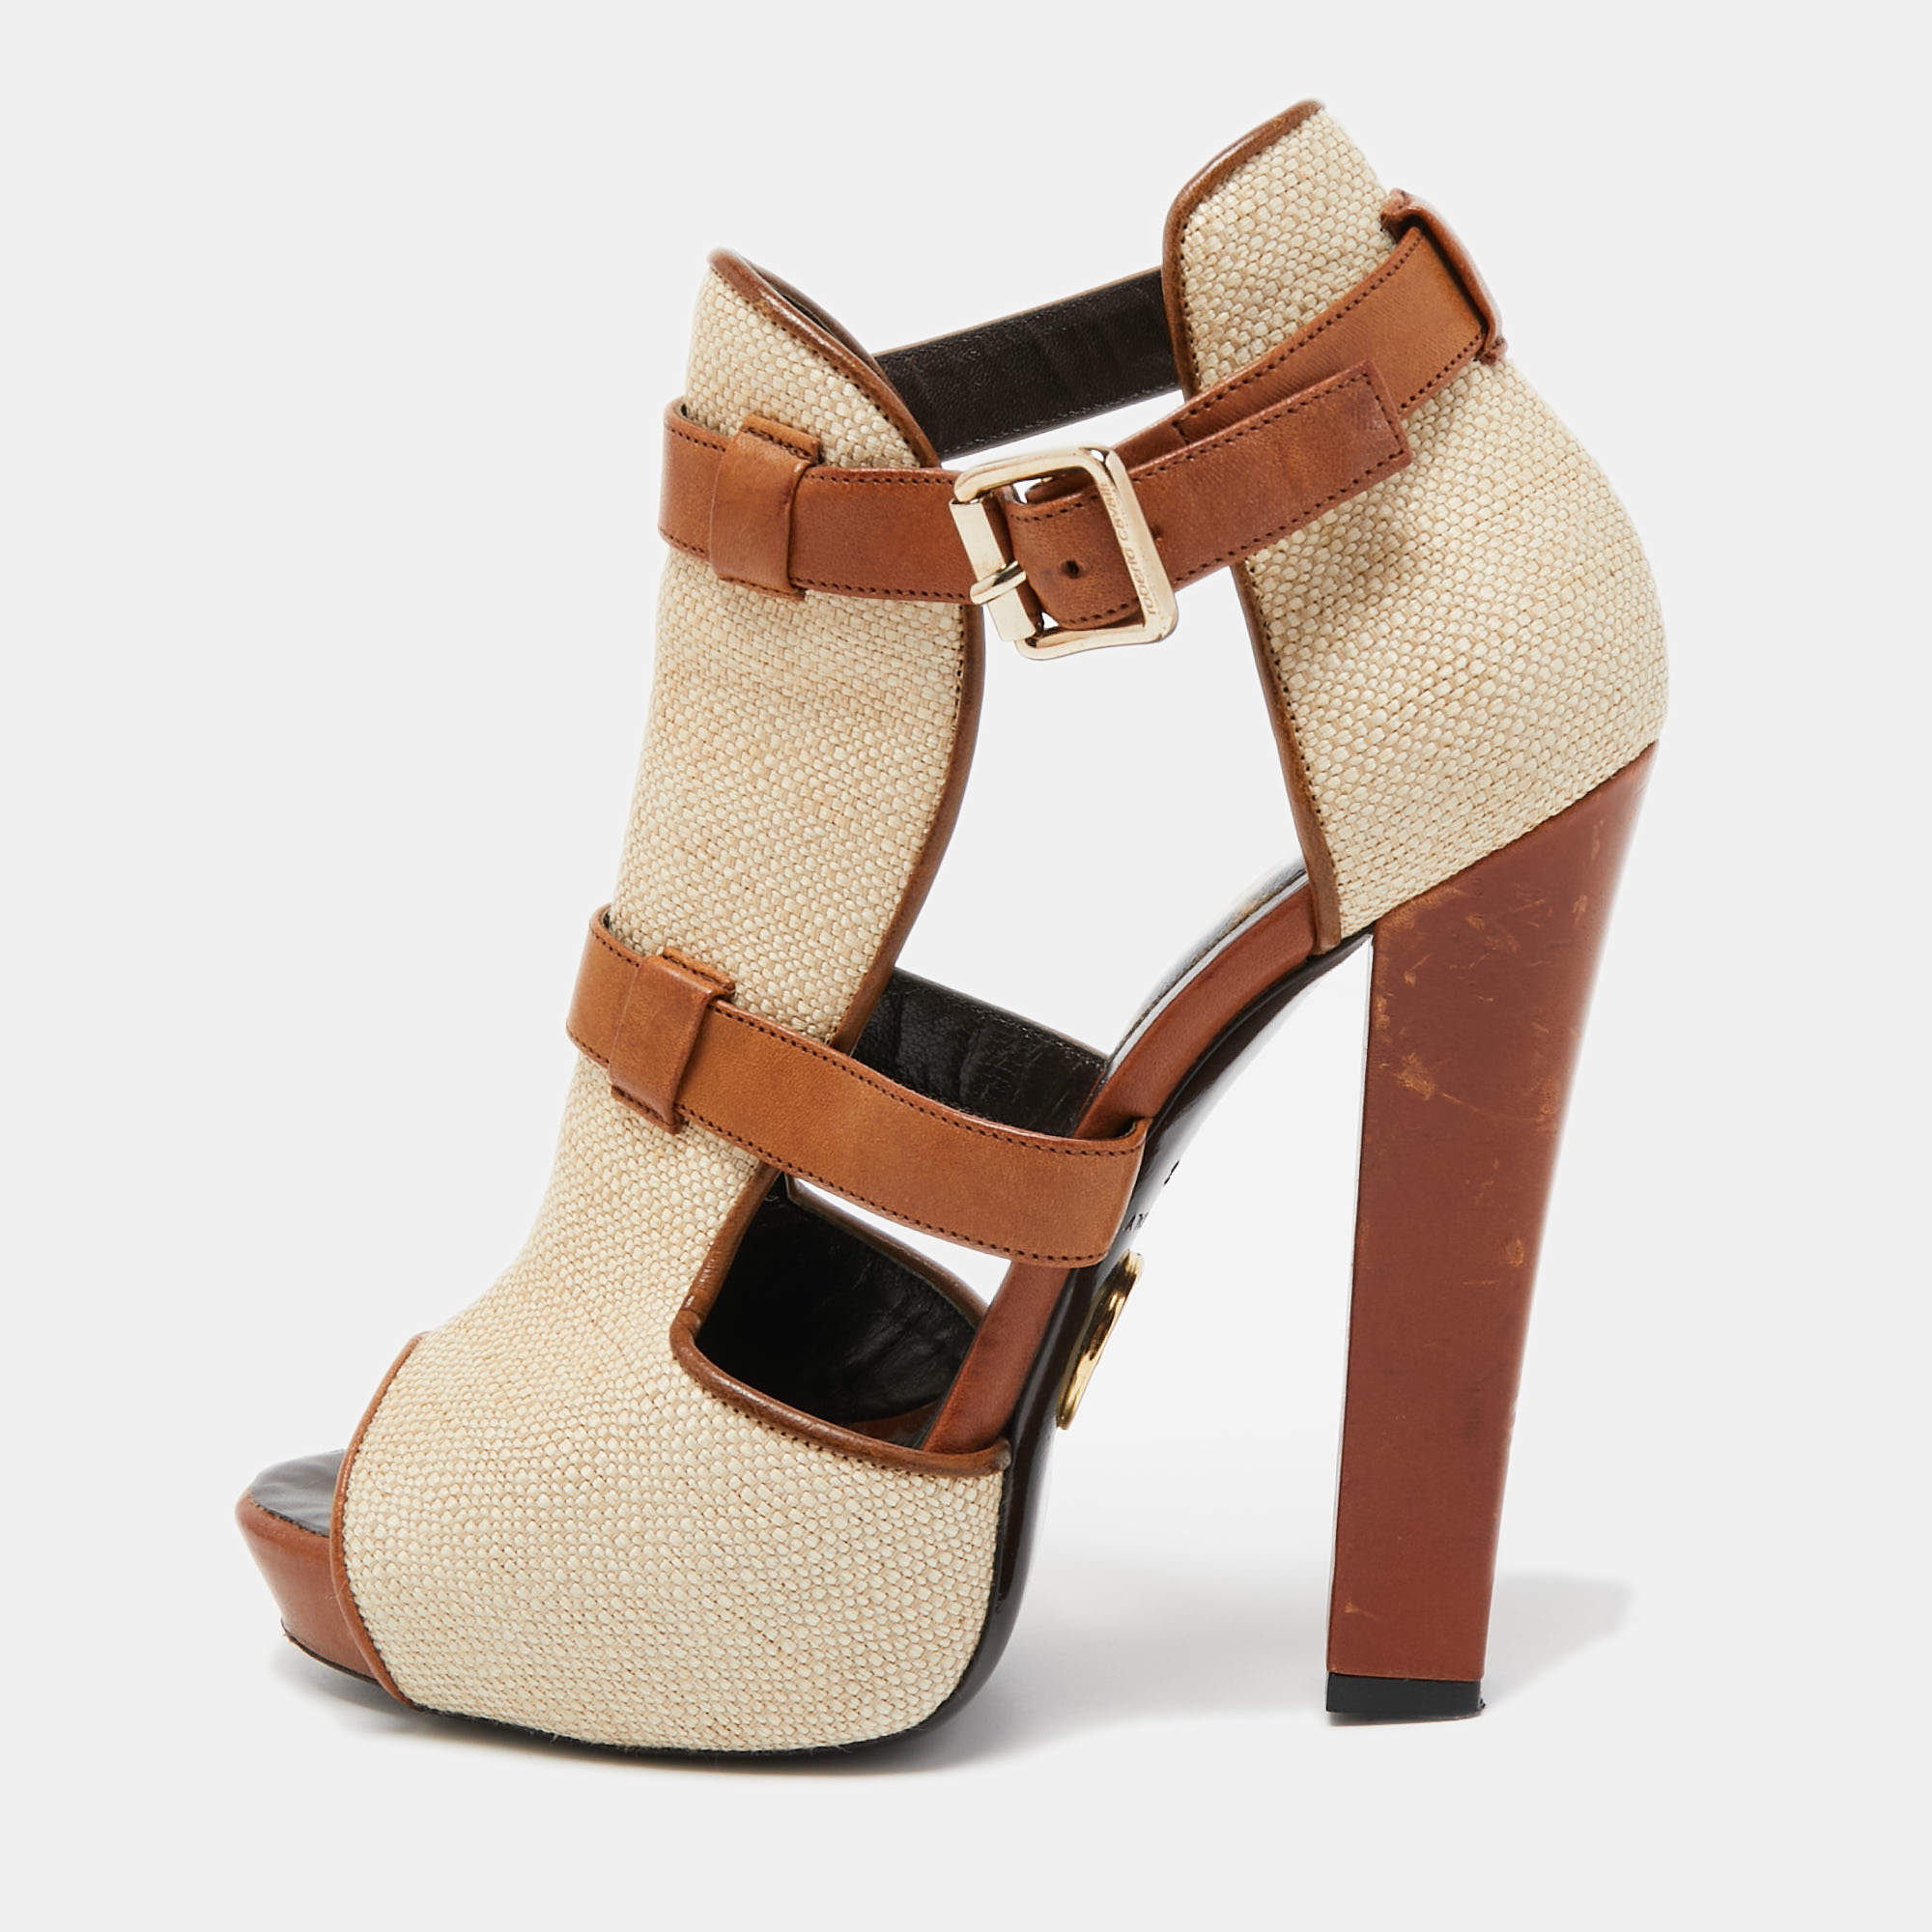 Roberto Cavalli Beige/Brown Raffia and Leather Double Strap Peep Toe Booties Size 38